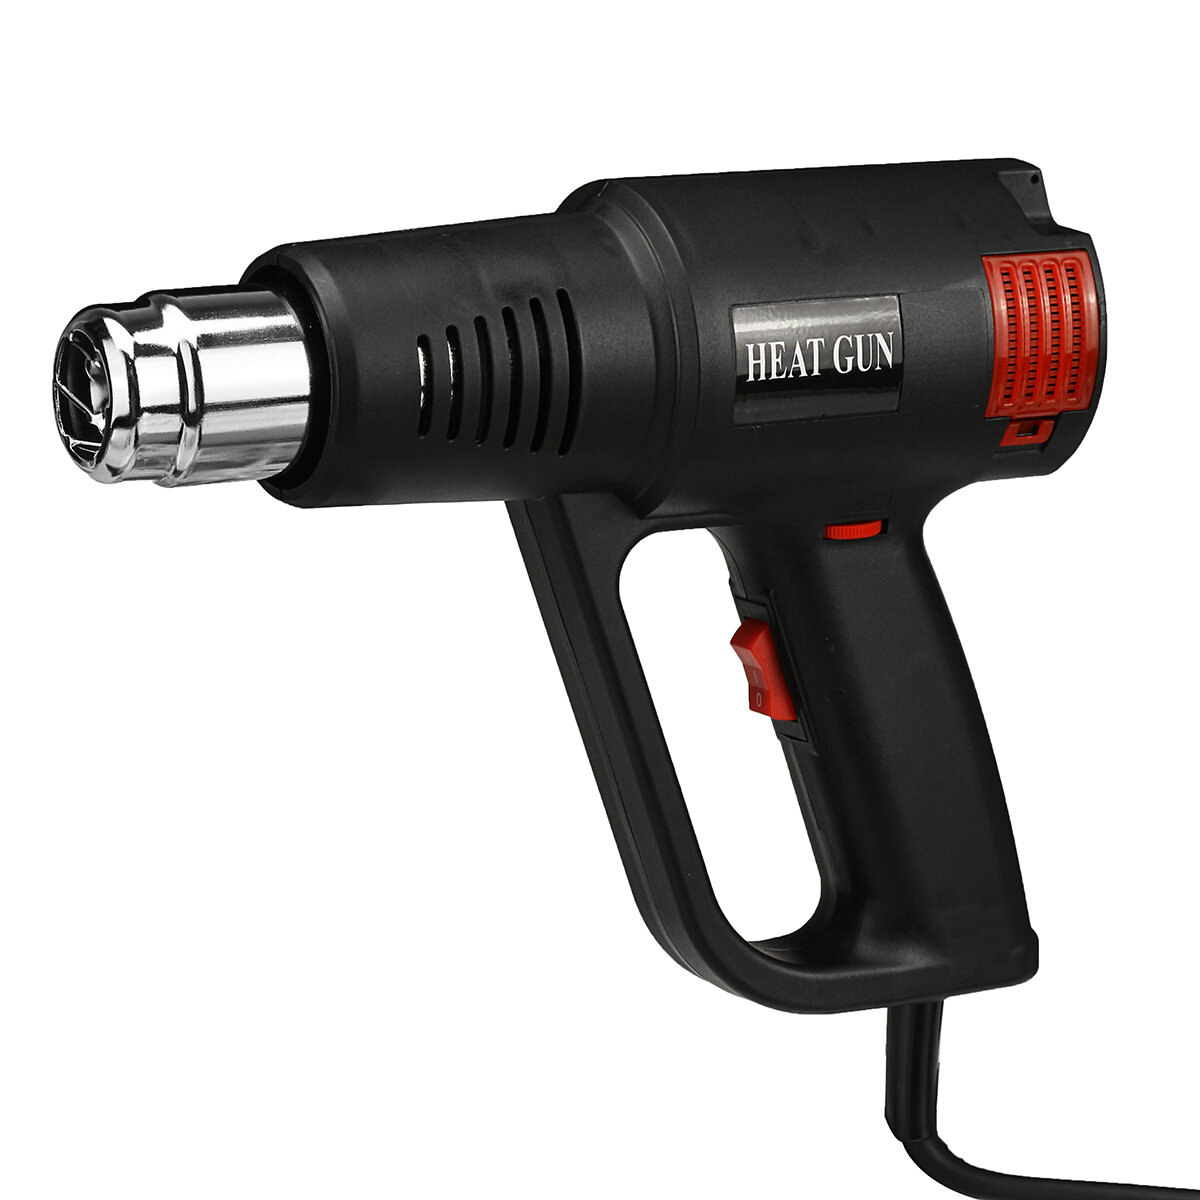 2000W 60-600 Profession Electric Heat Guns 2 Speed Heat Variable Hot Air Power Tool Hair Dryer for S